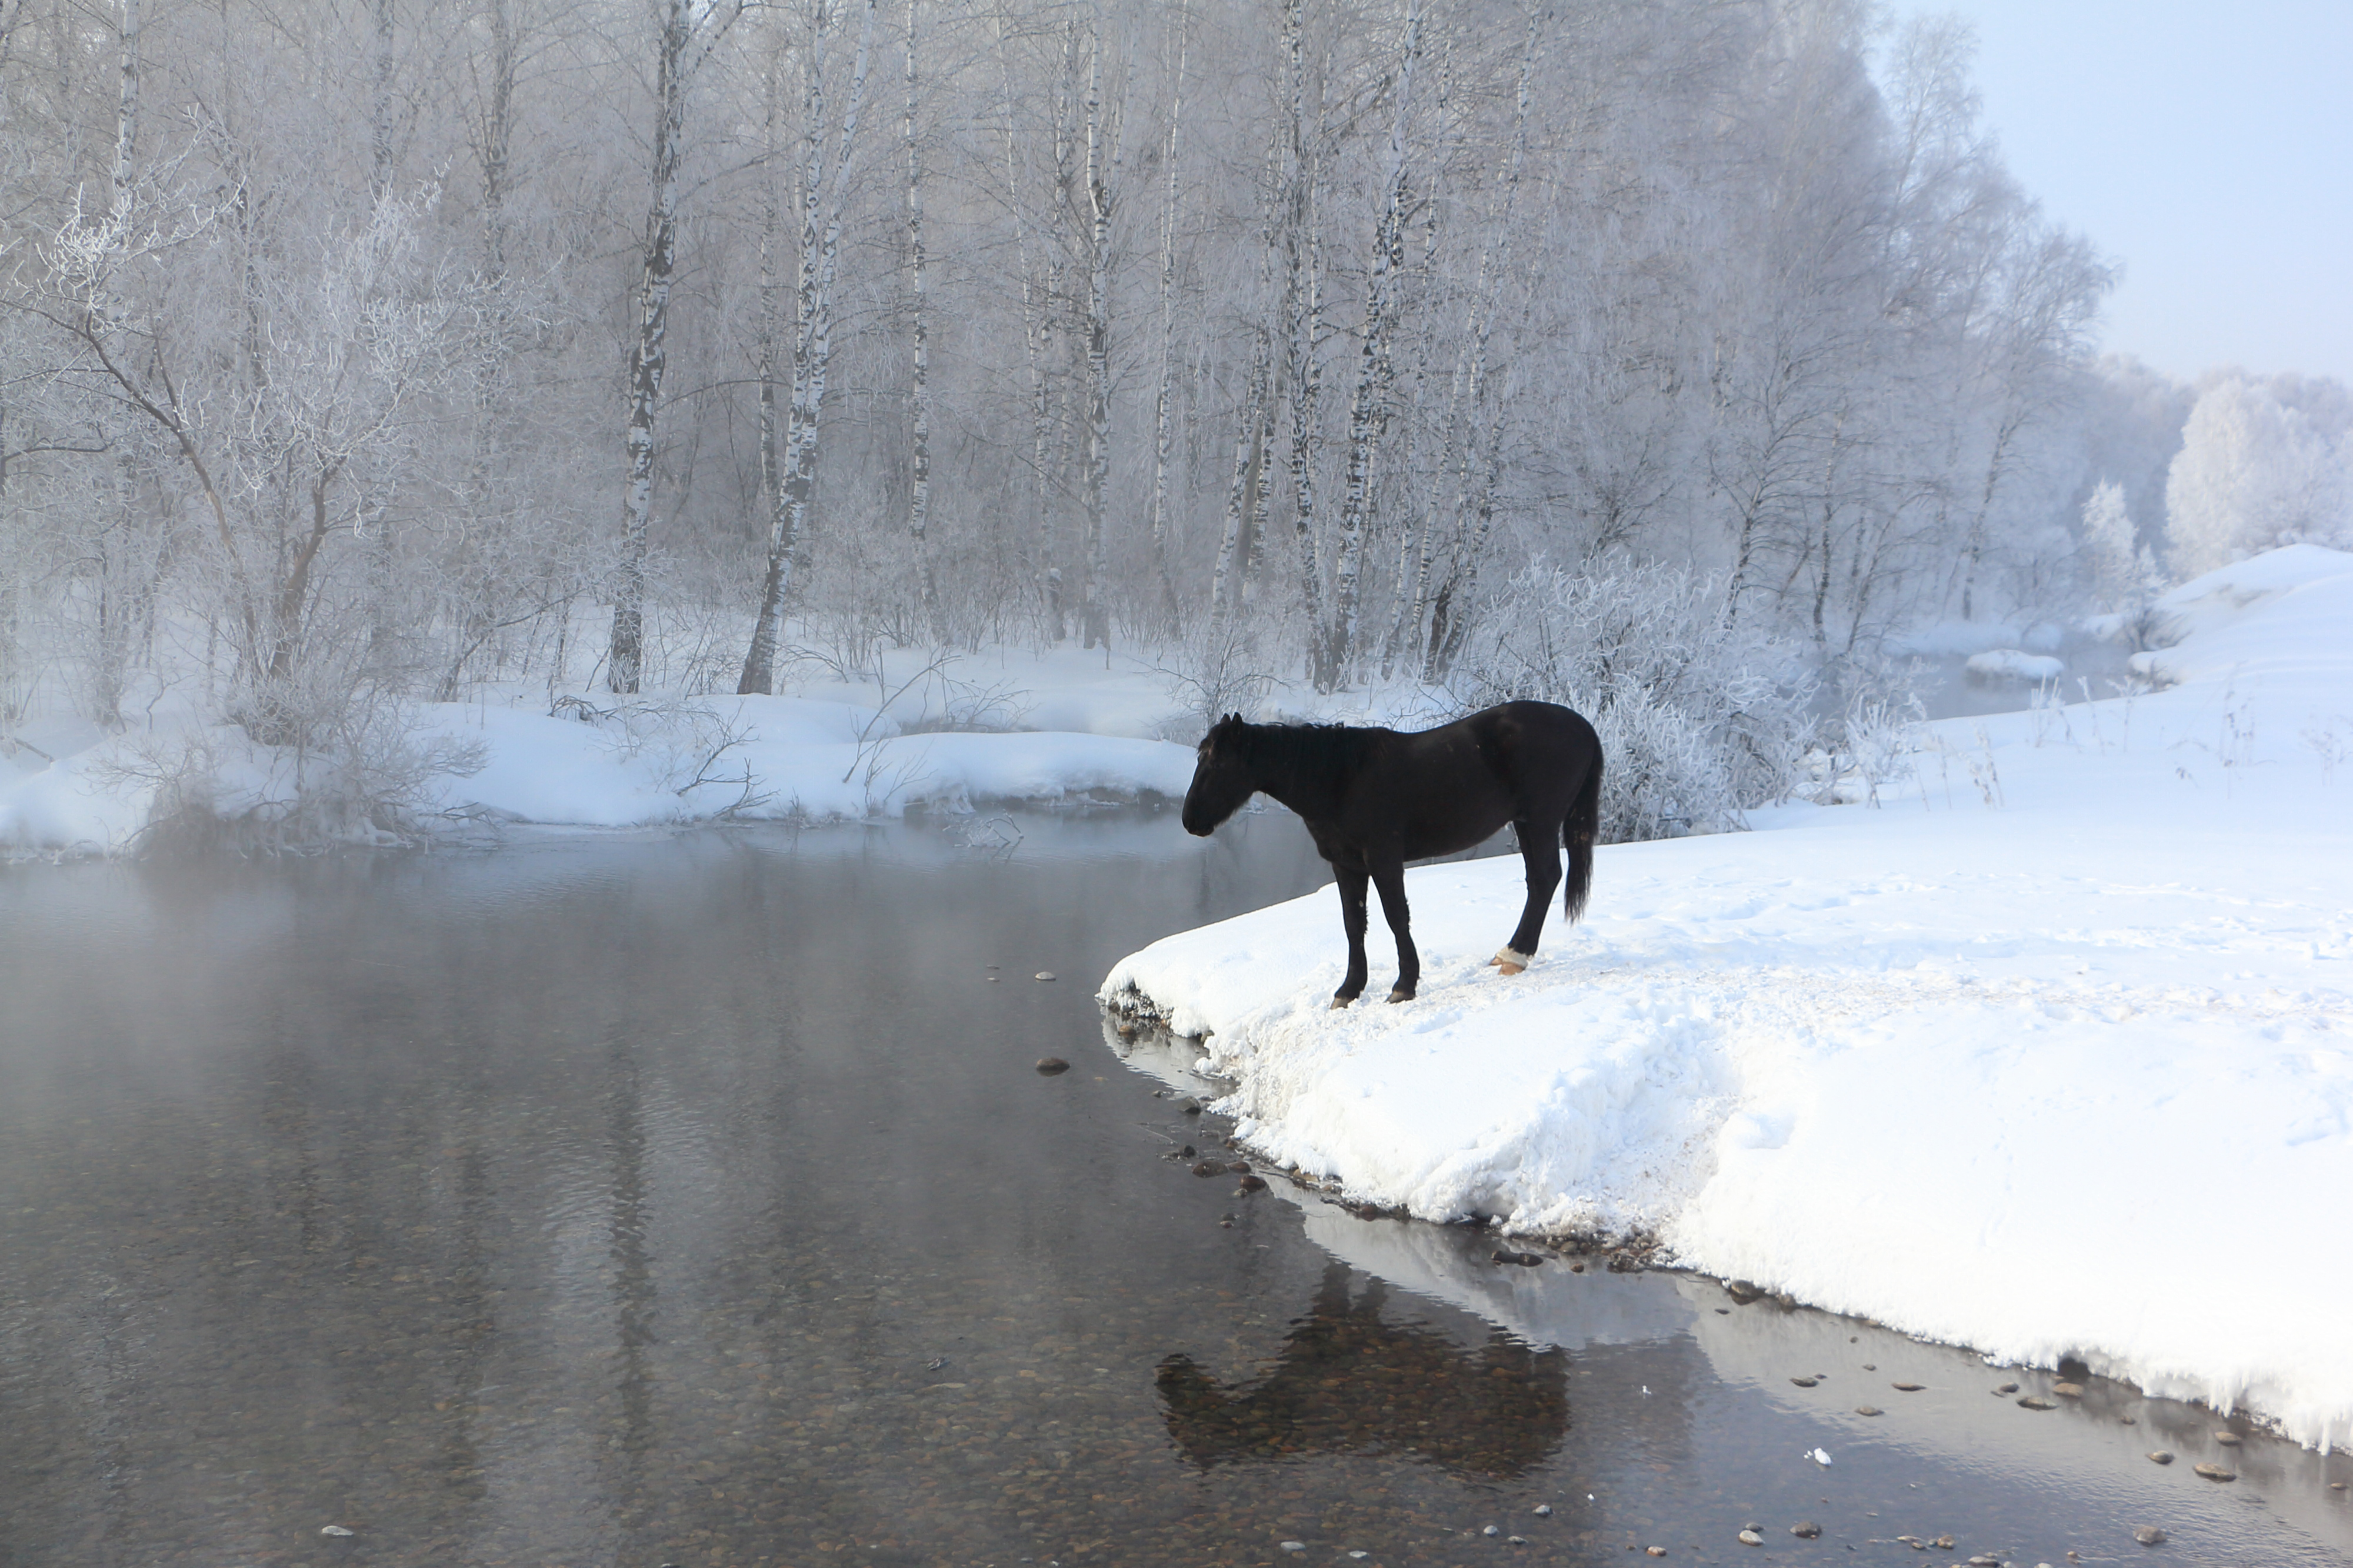 horse in snow next to river